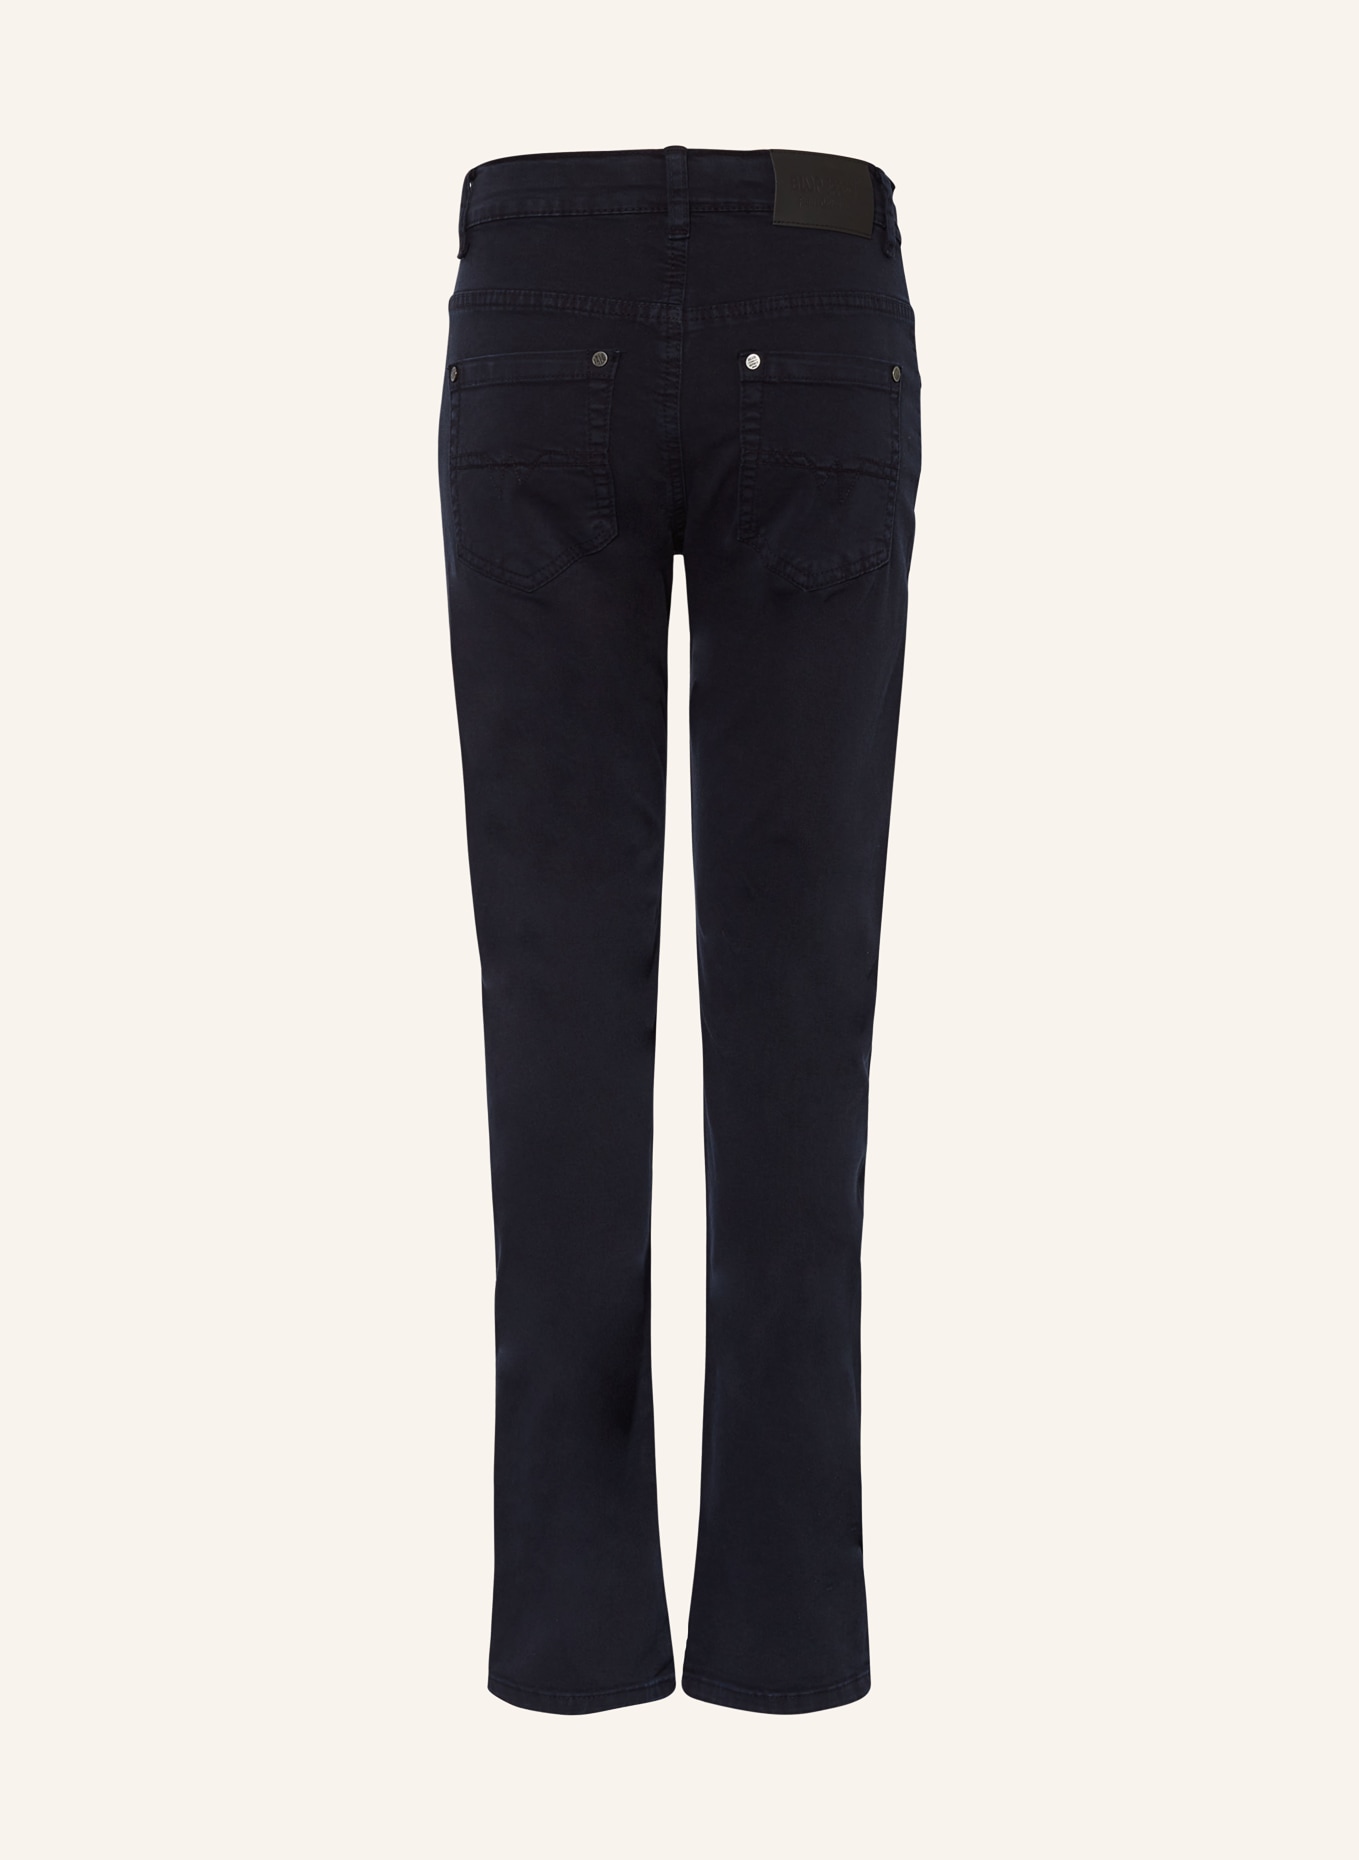 BLUE EFFECT Jeans Relaxed Fit, Farbe: DUNKELBLAU (Bild 2)